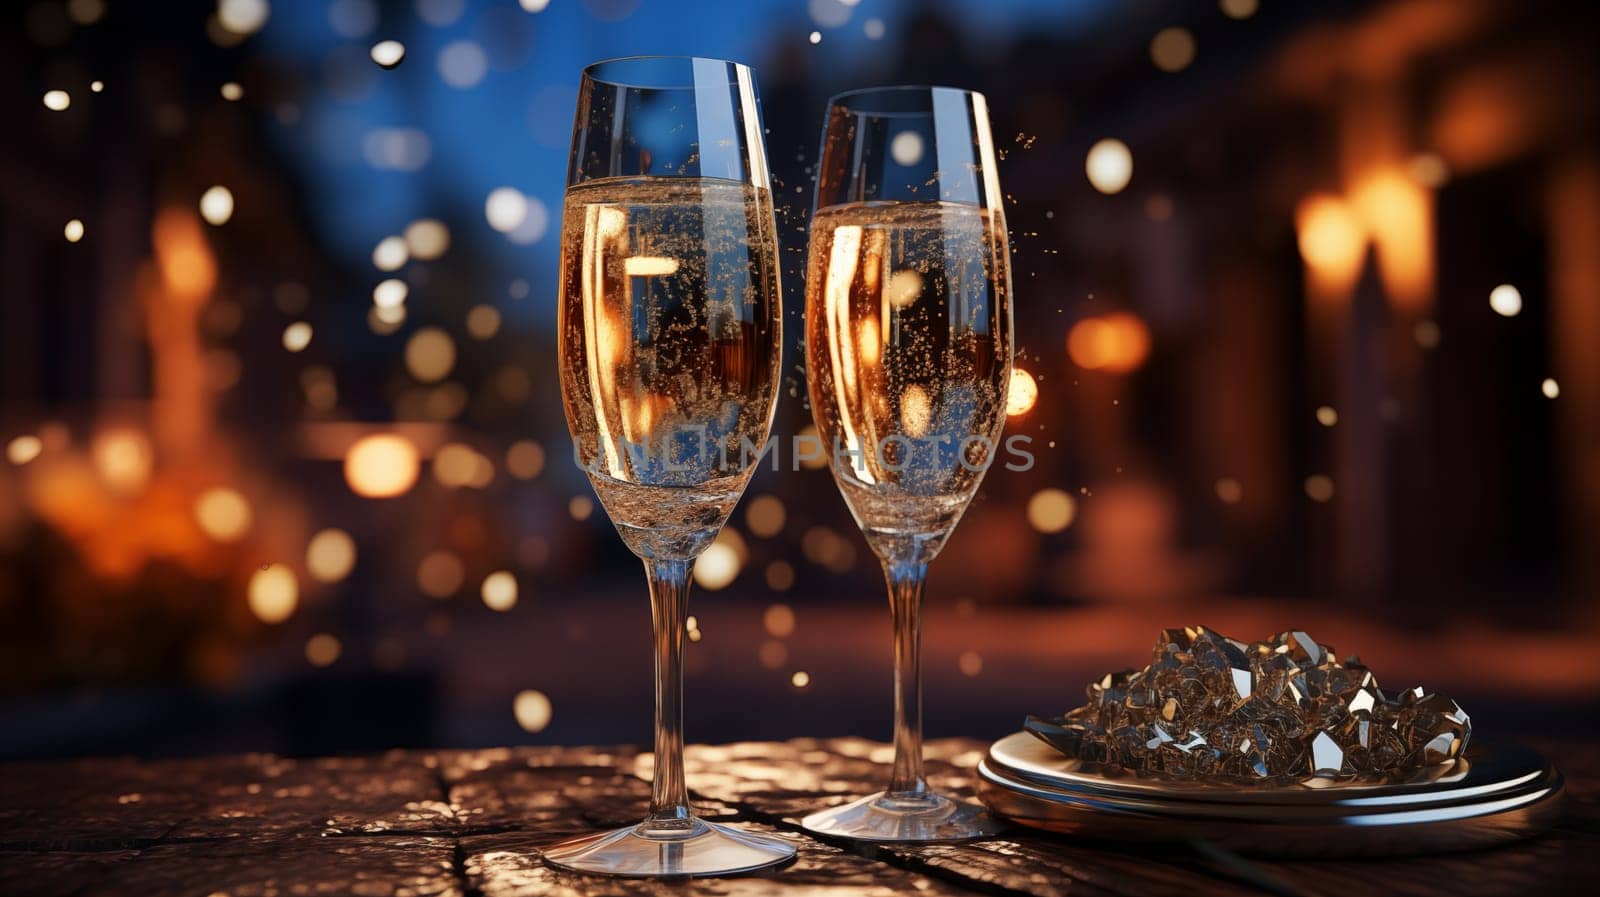 Two glasses of champagne are on the table in the evening golden lights, next to a saucer with ice in the evening, surrounded by golden bokeh lights.